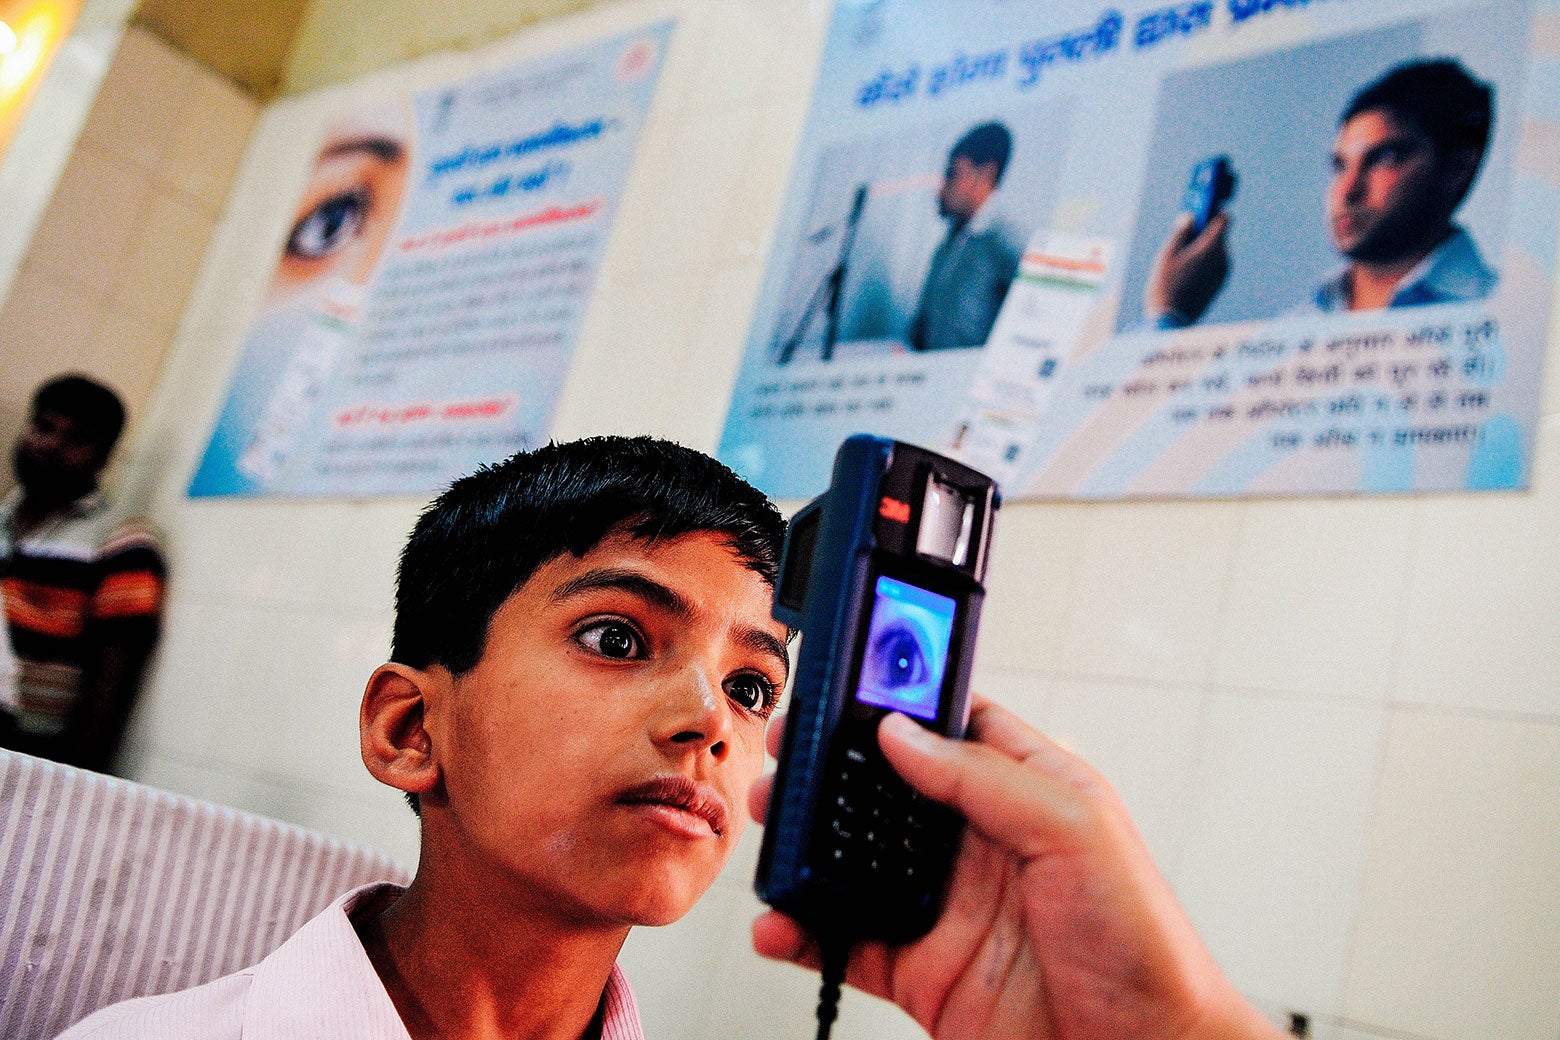 A boy has his iris scanned for the Aadhaar identity system on April 12, 2013 in New Delhi.